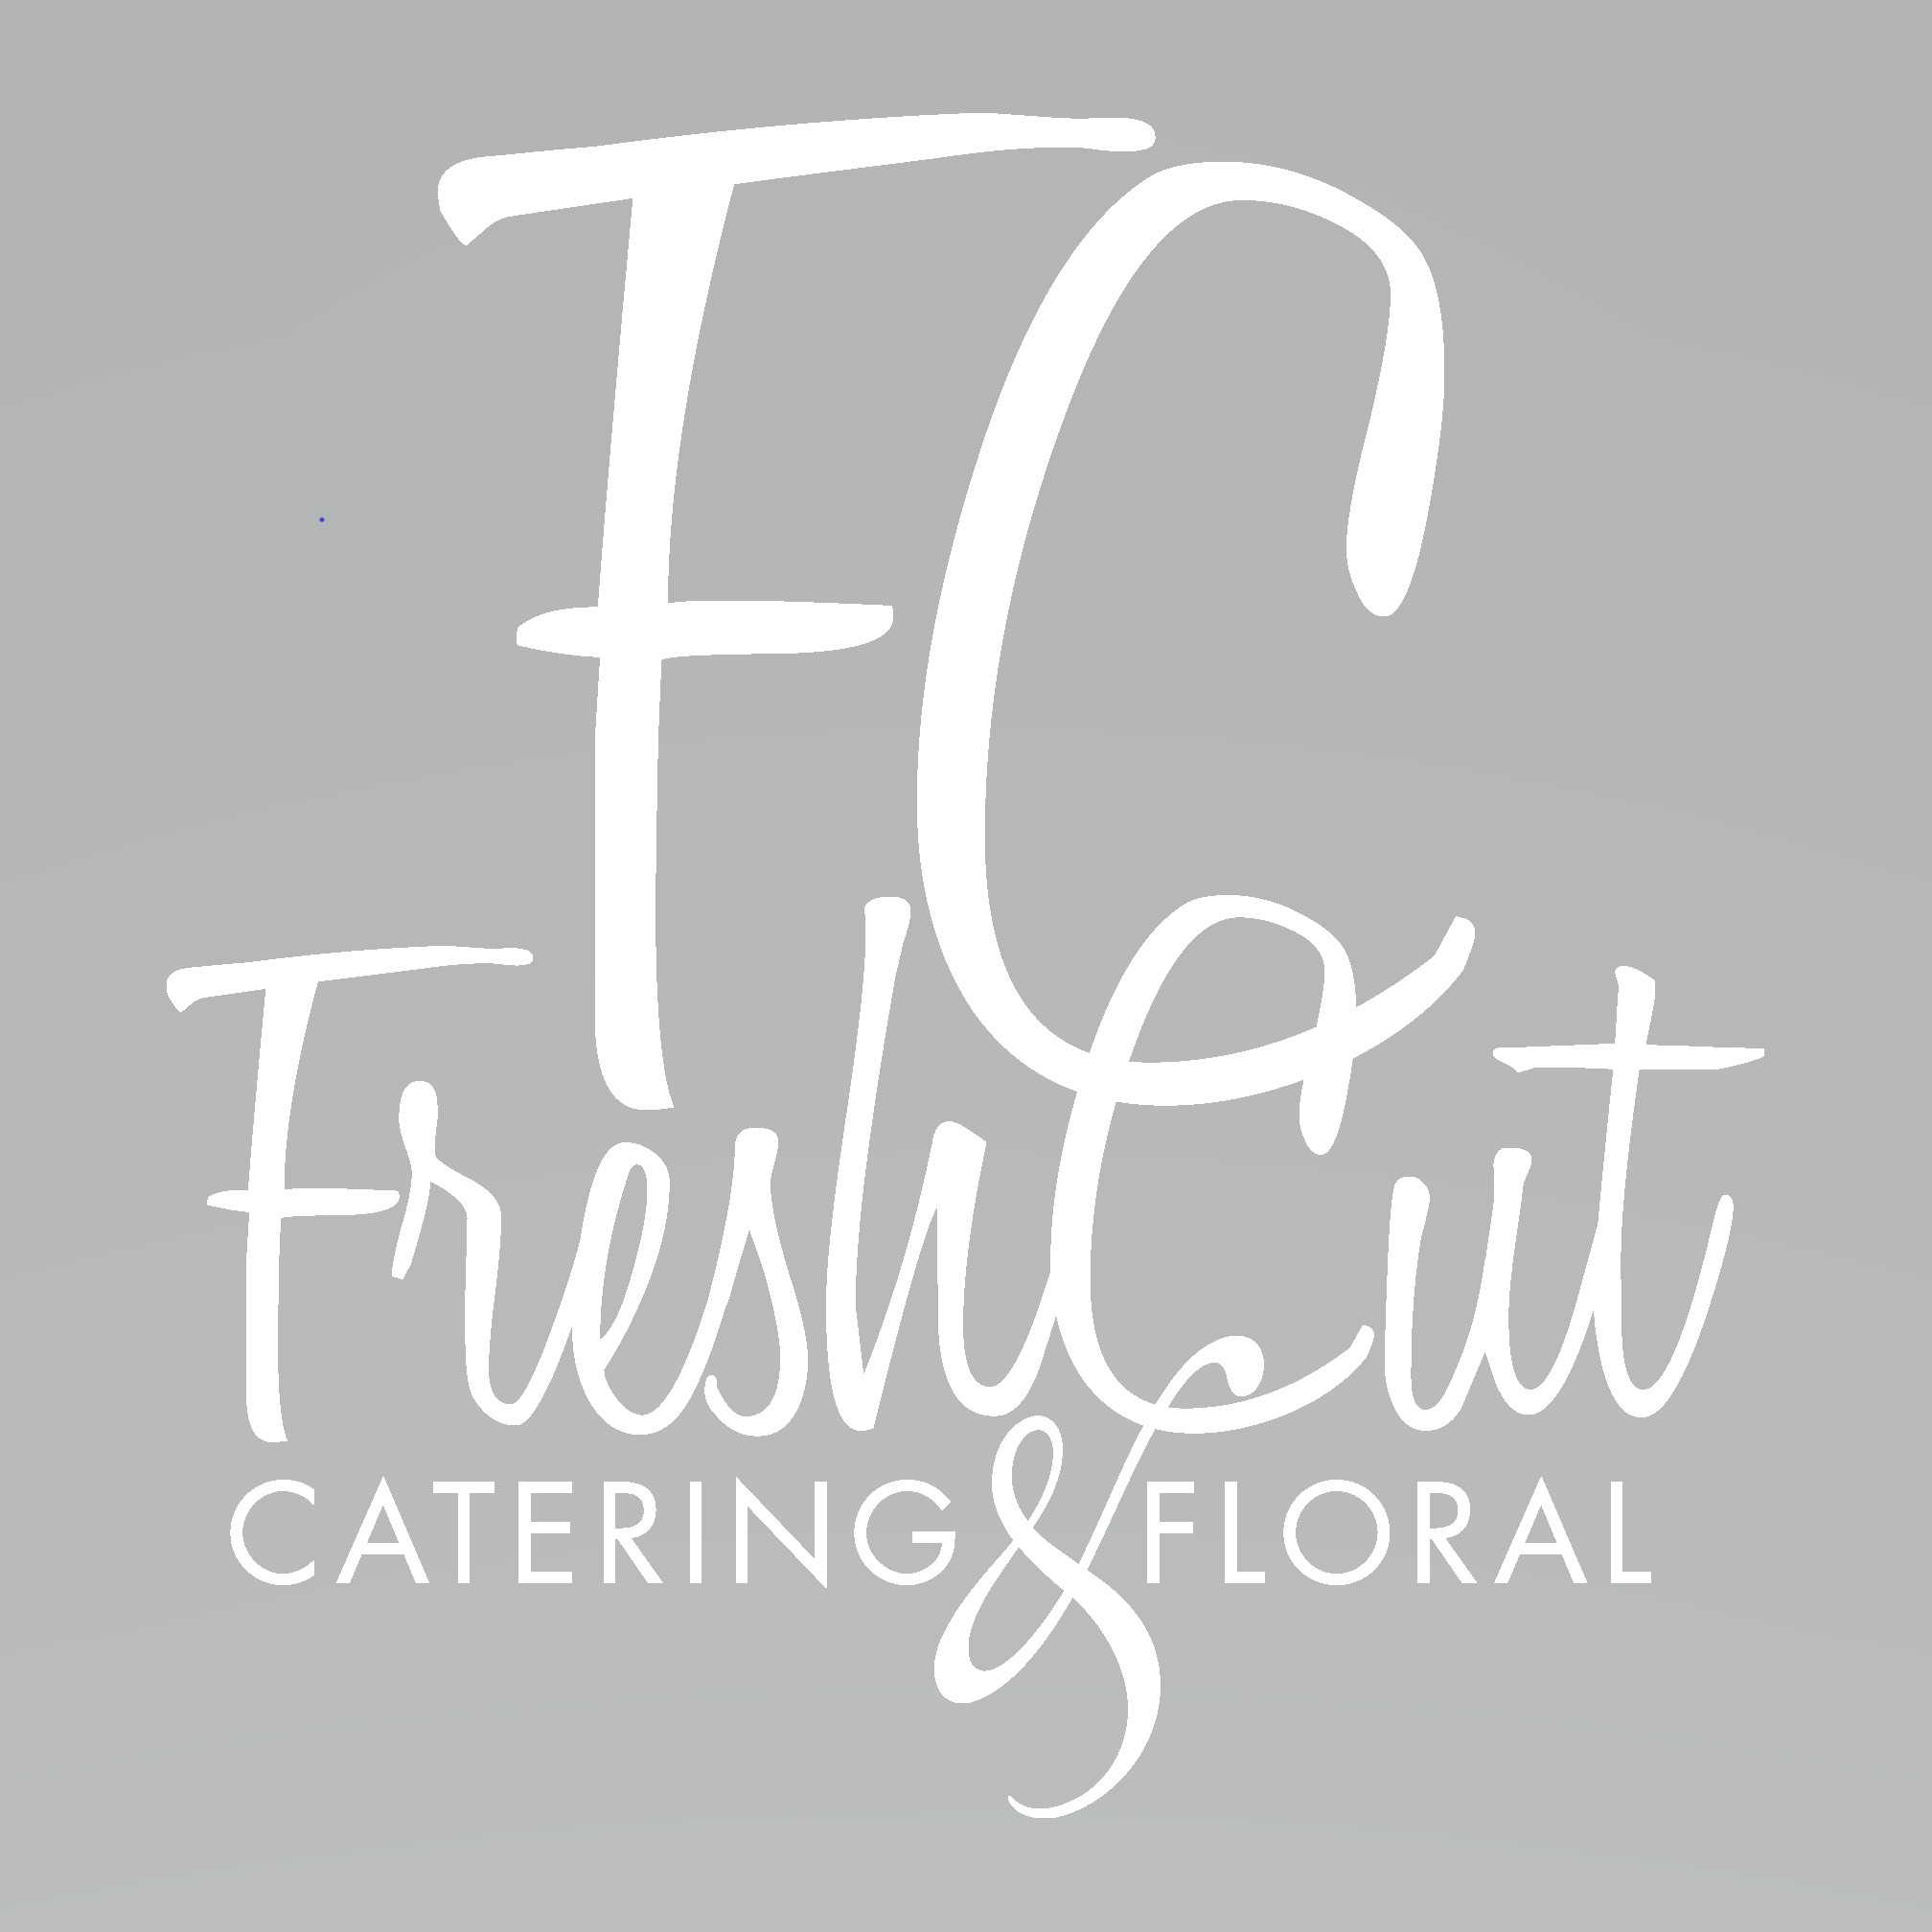 Fresh Cut Catering and Floral / Galleries